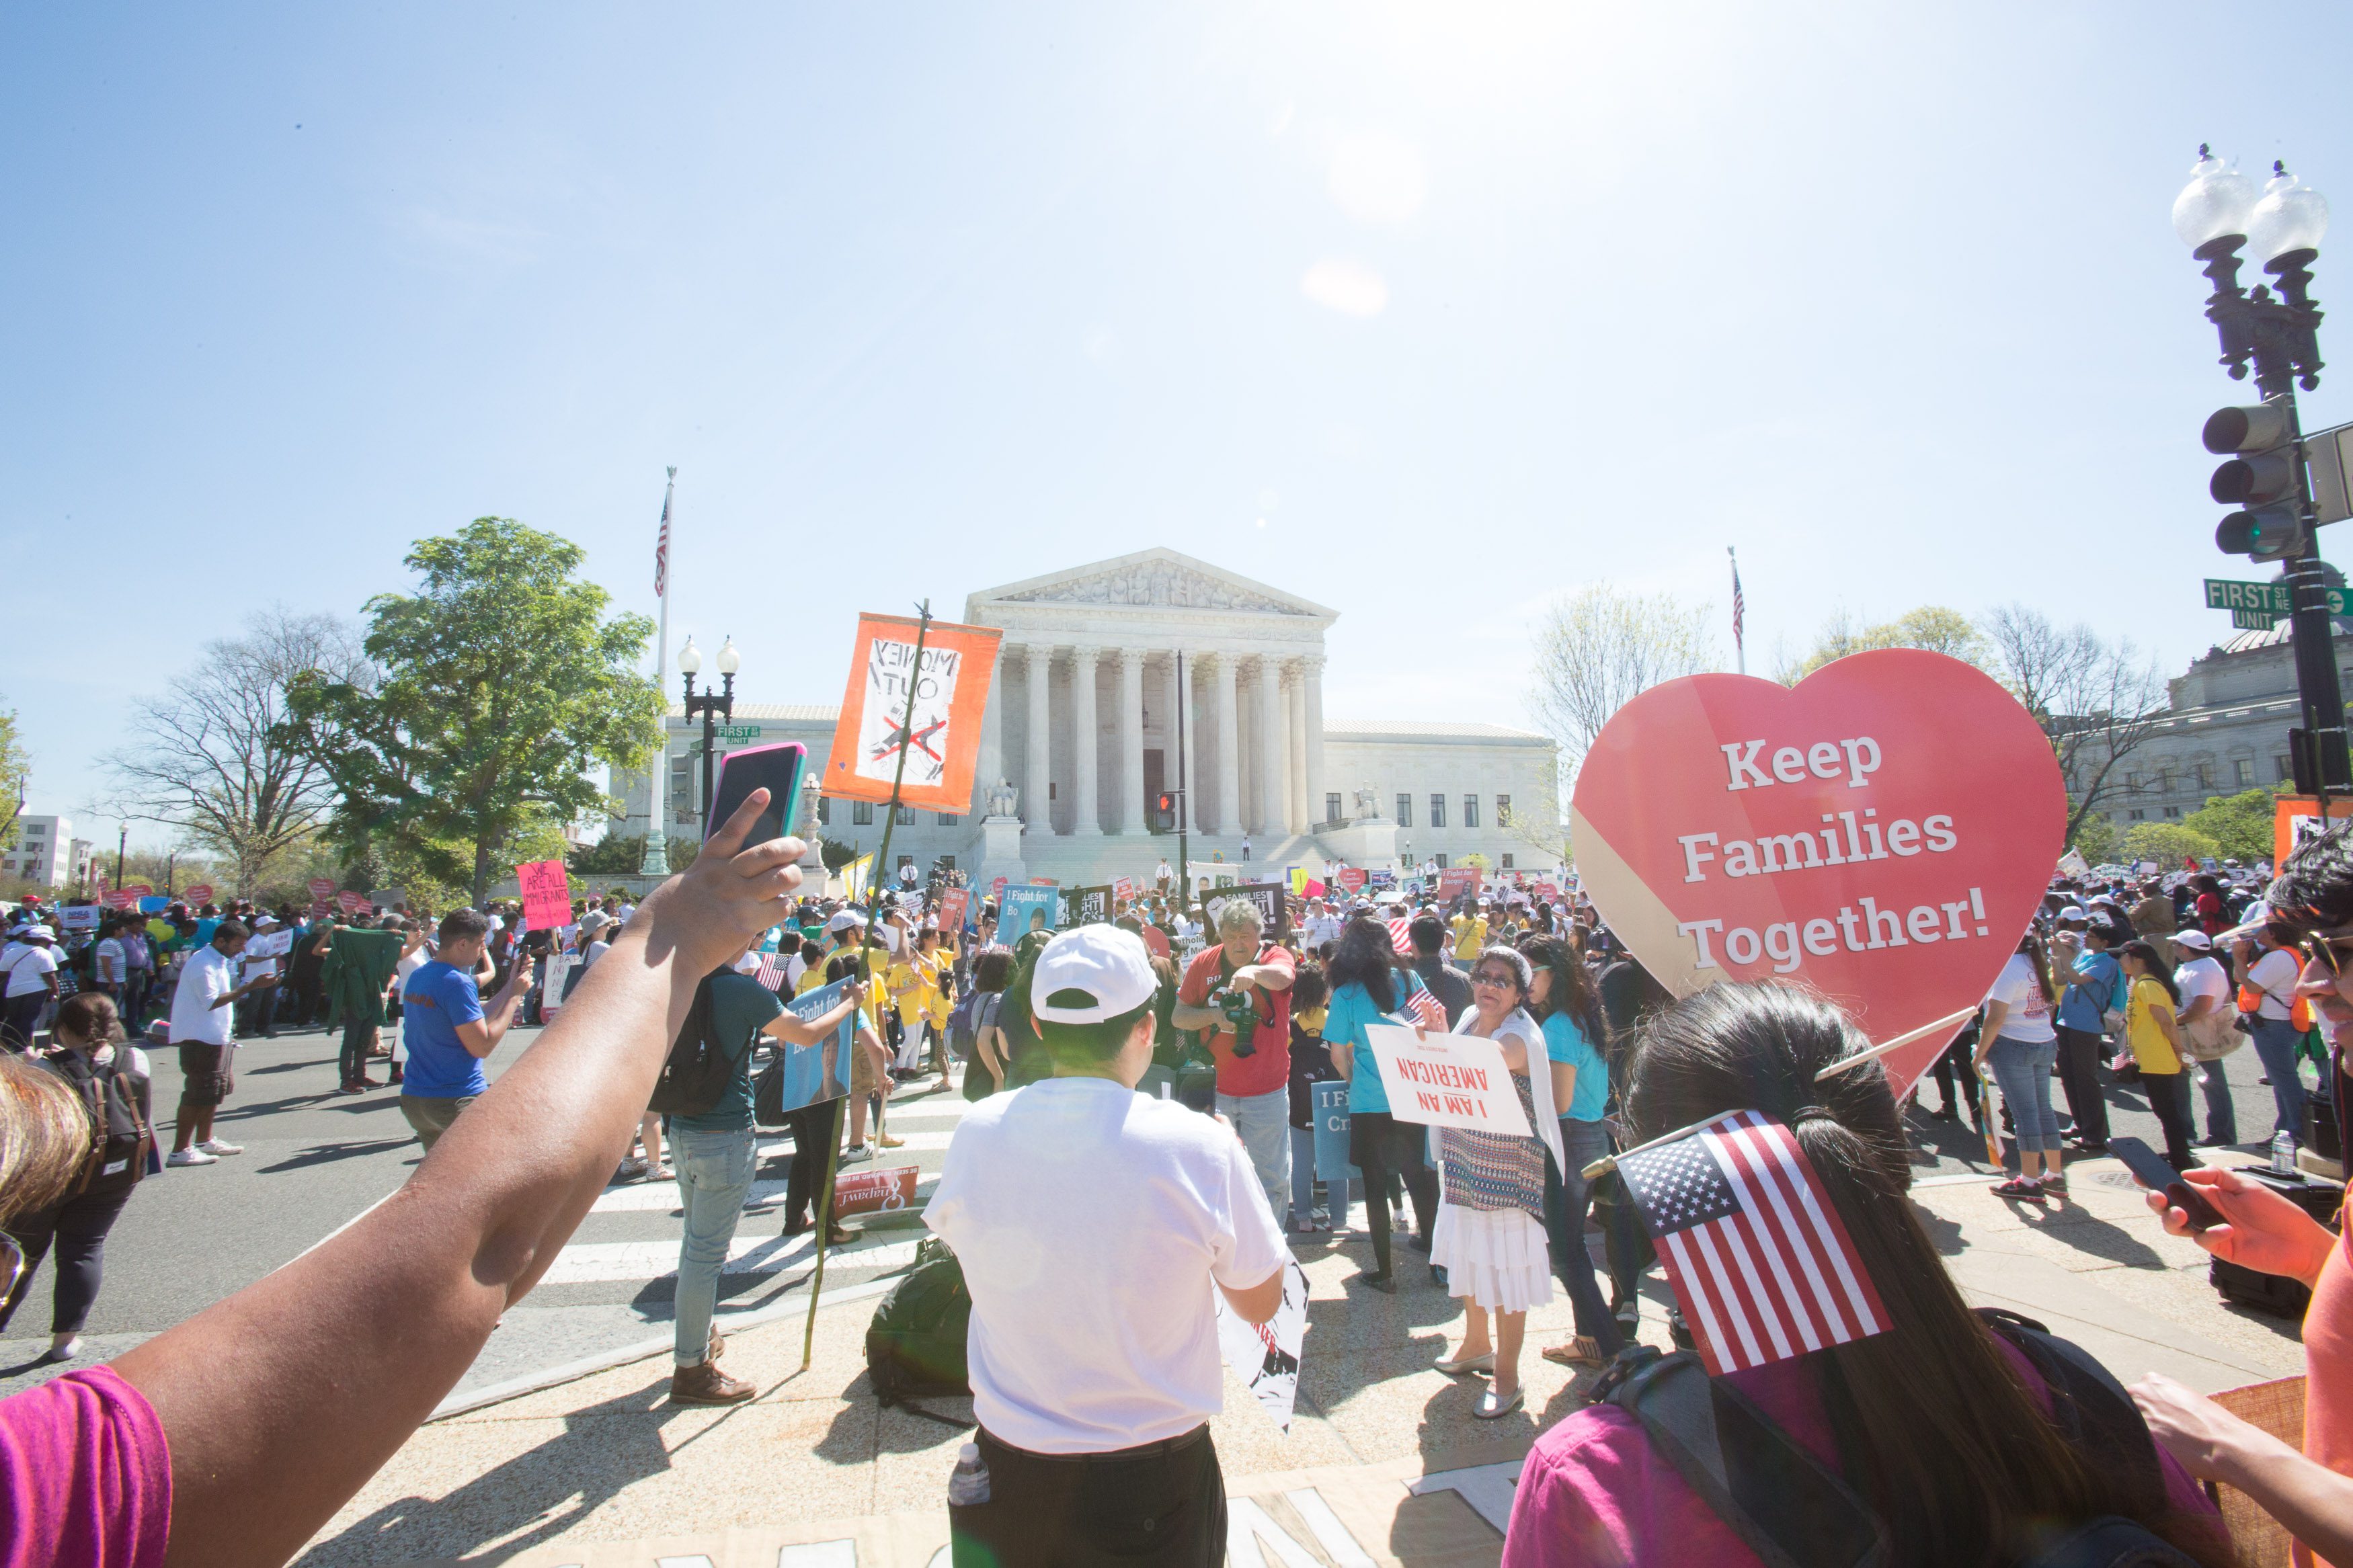 Immigration activists gather at the U.S. Supreme Court as justices hear oral arguments on DAPA (Deferred Action for Parents of Americans). Joseph Molieri/Bread for the World.